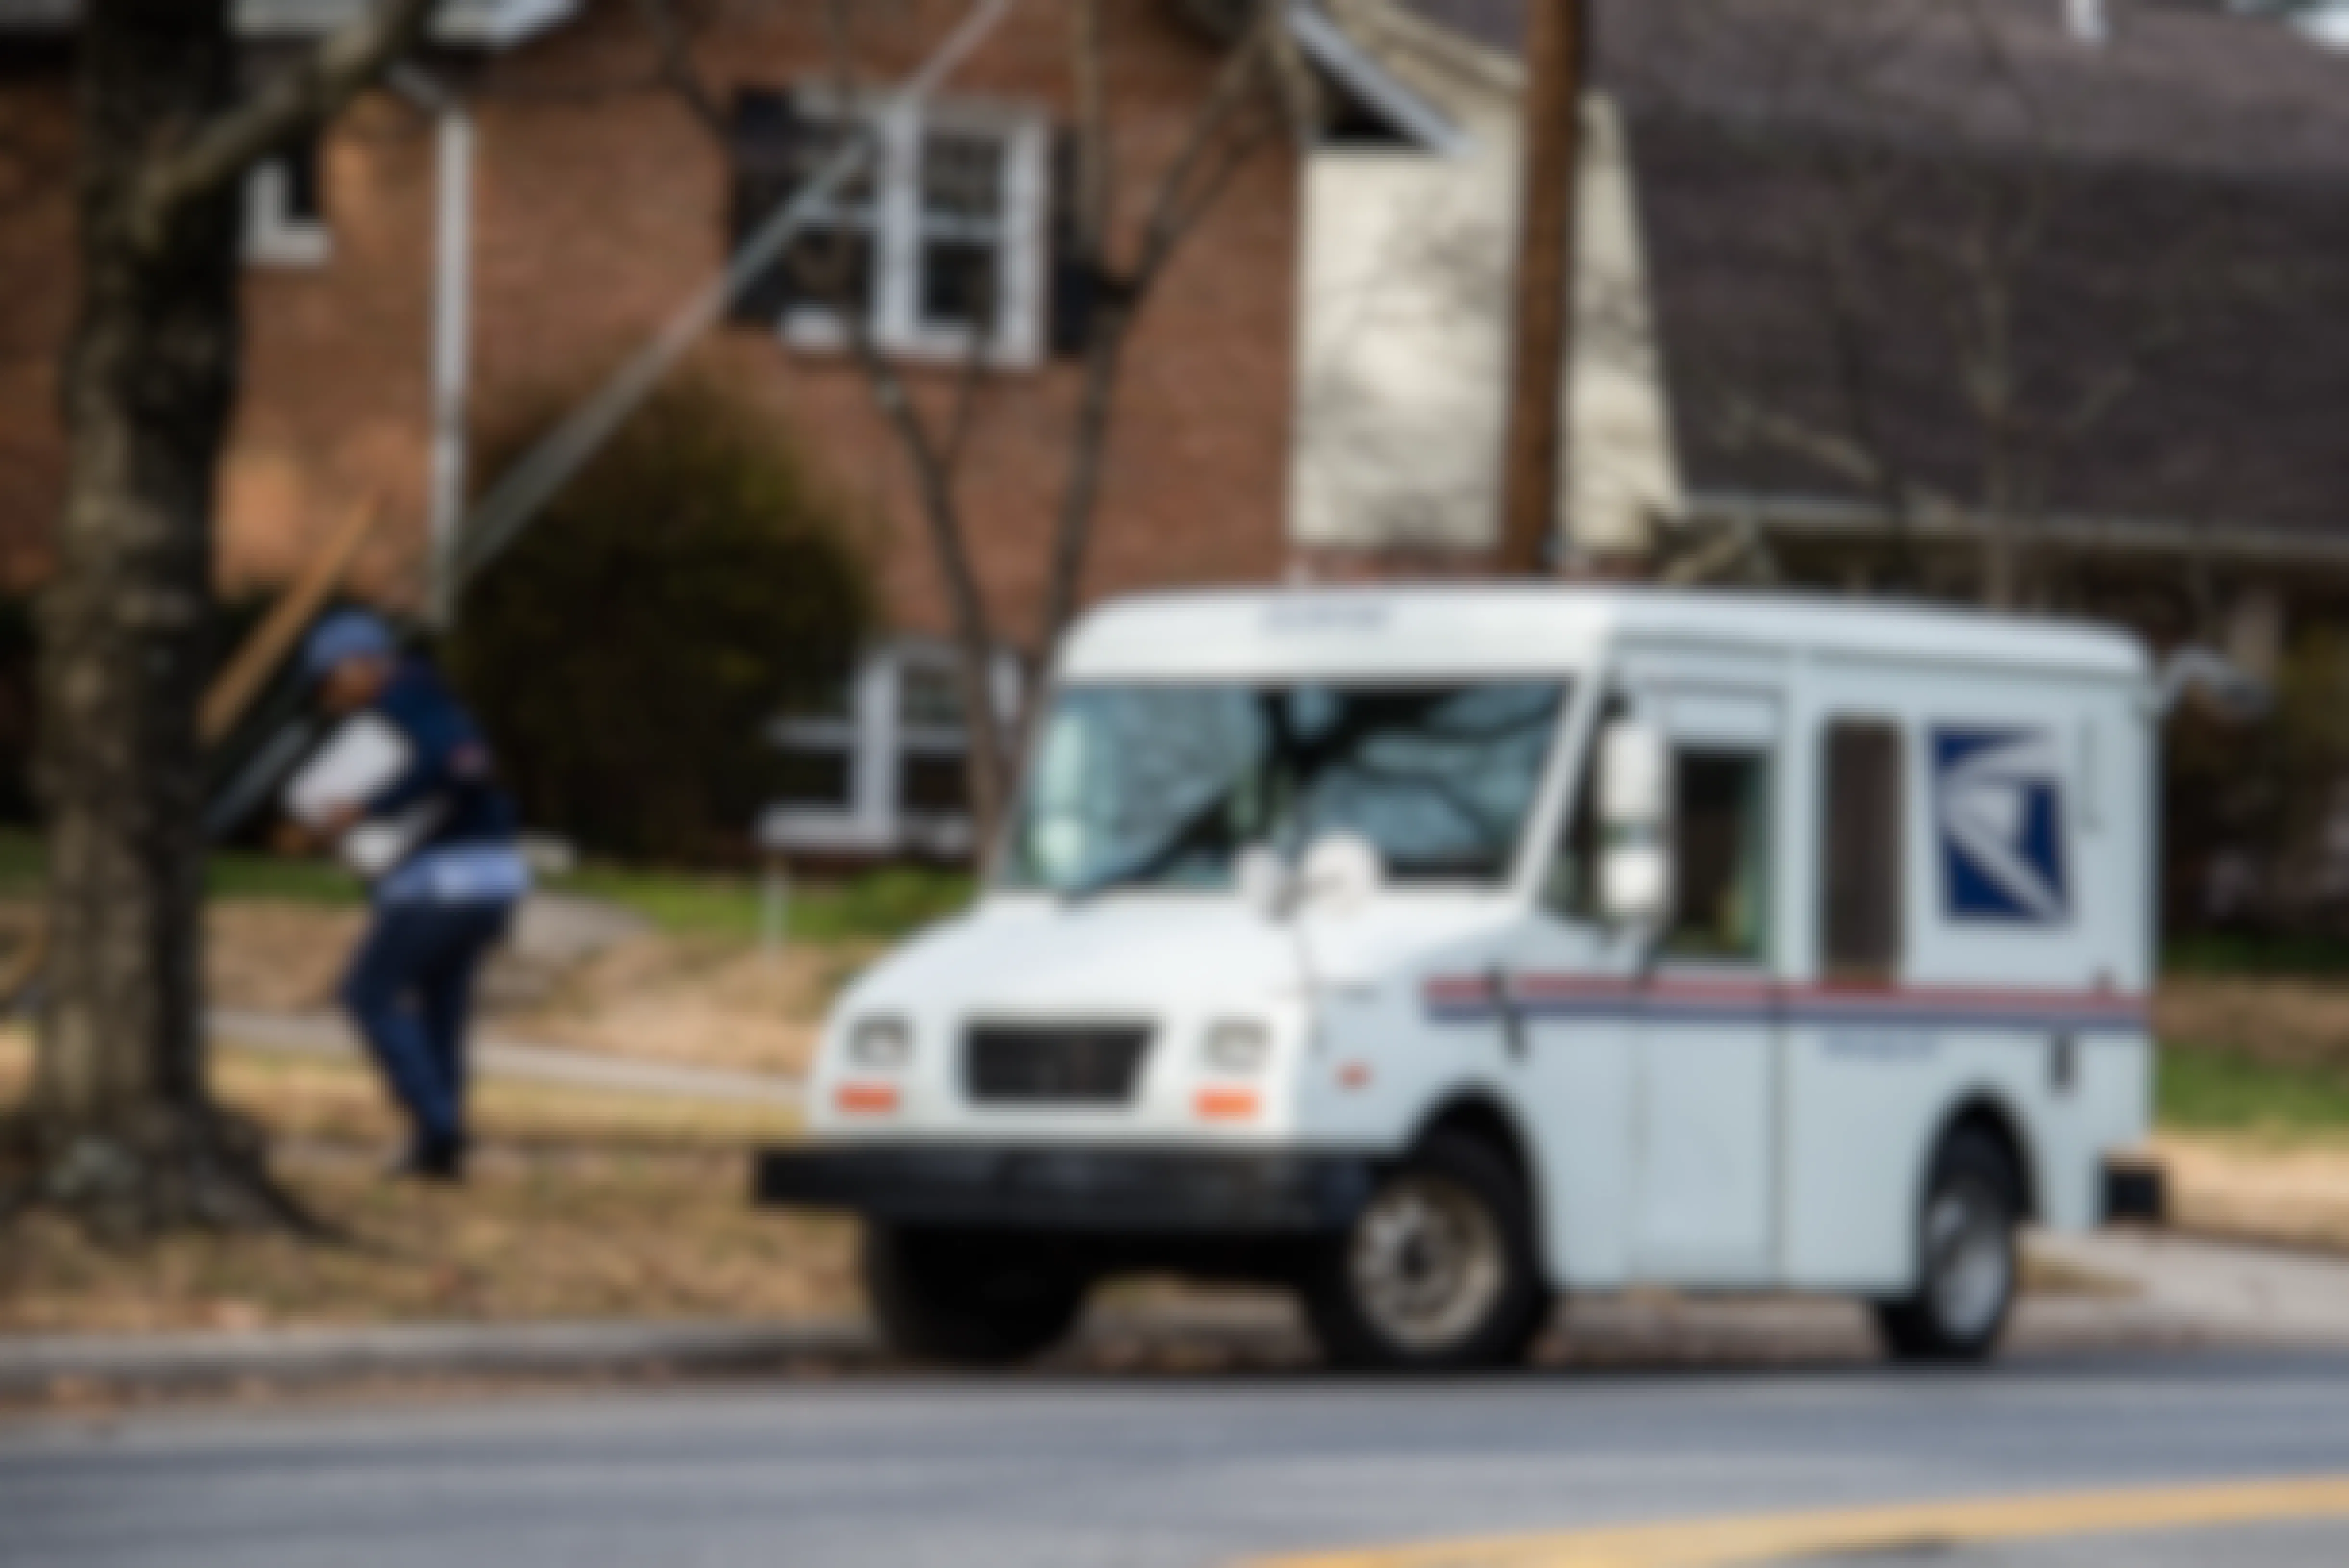 A USPS mail truck pulled up to a curb and a postal worker walking toward a house, carrying a package.